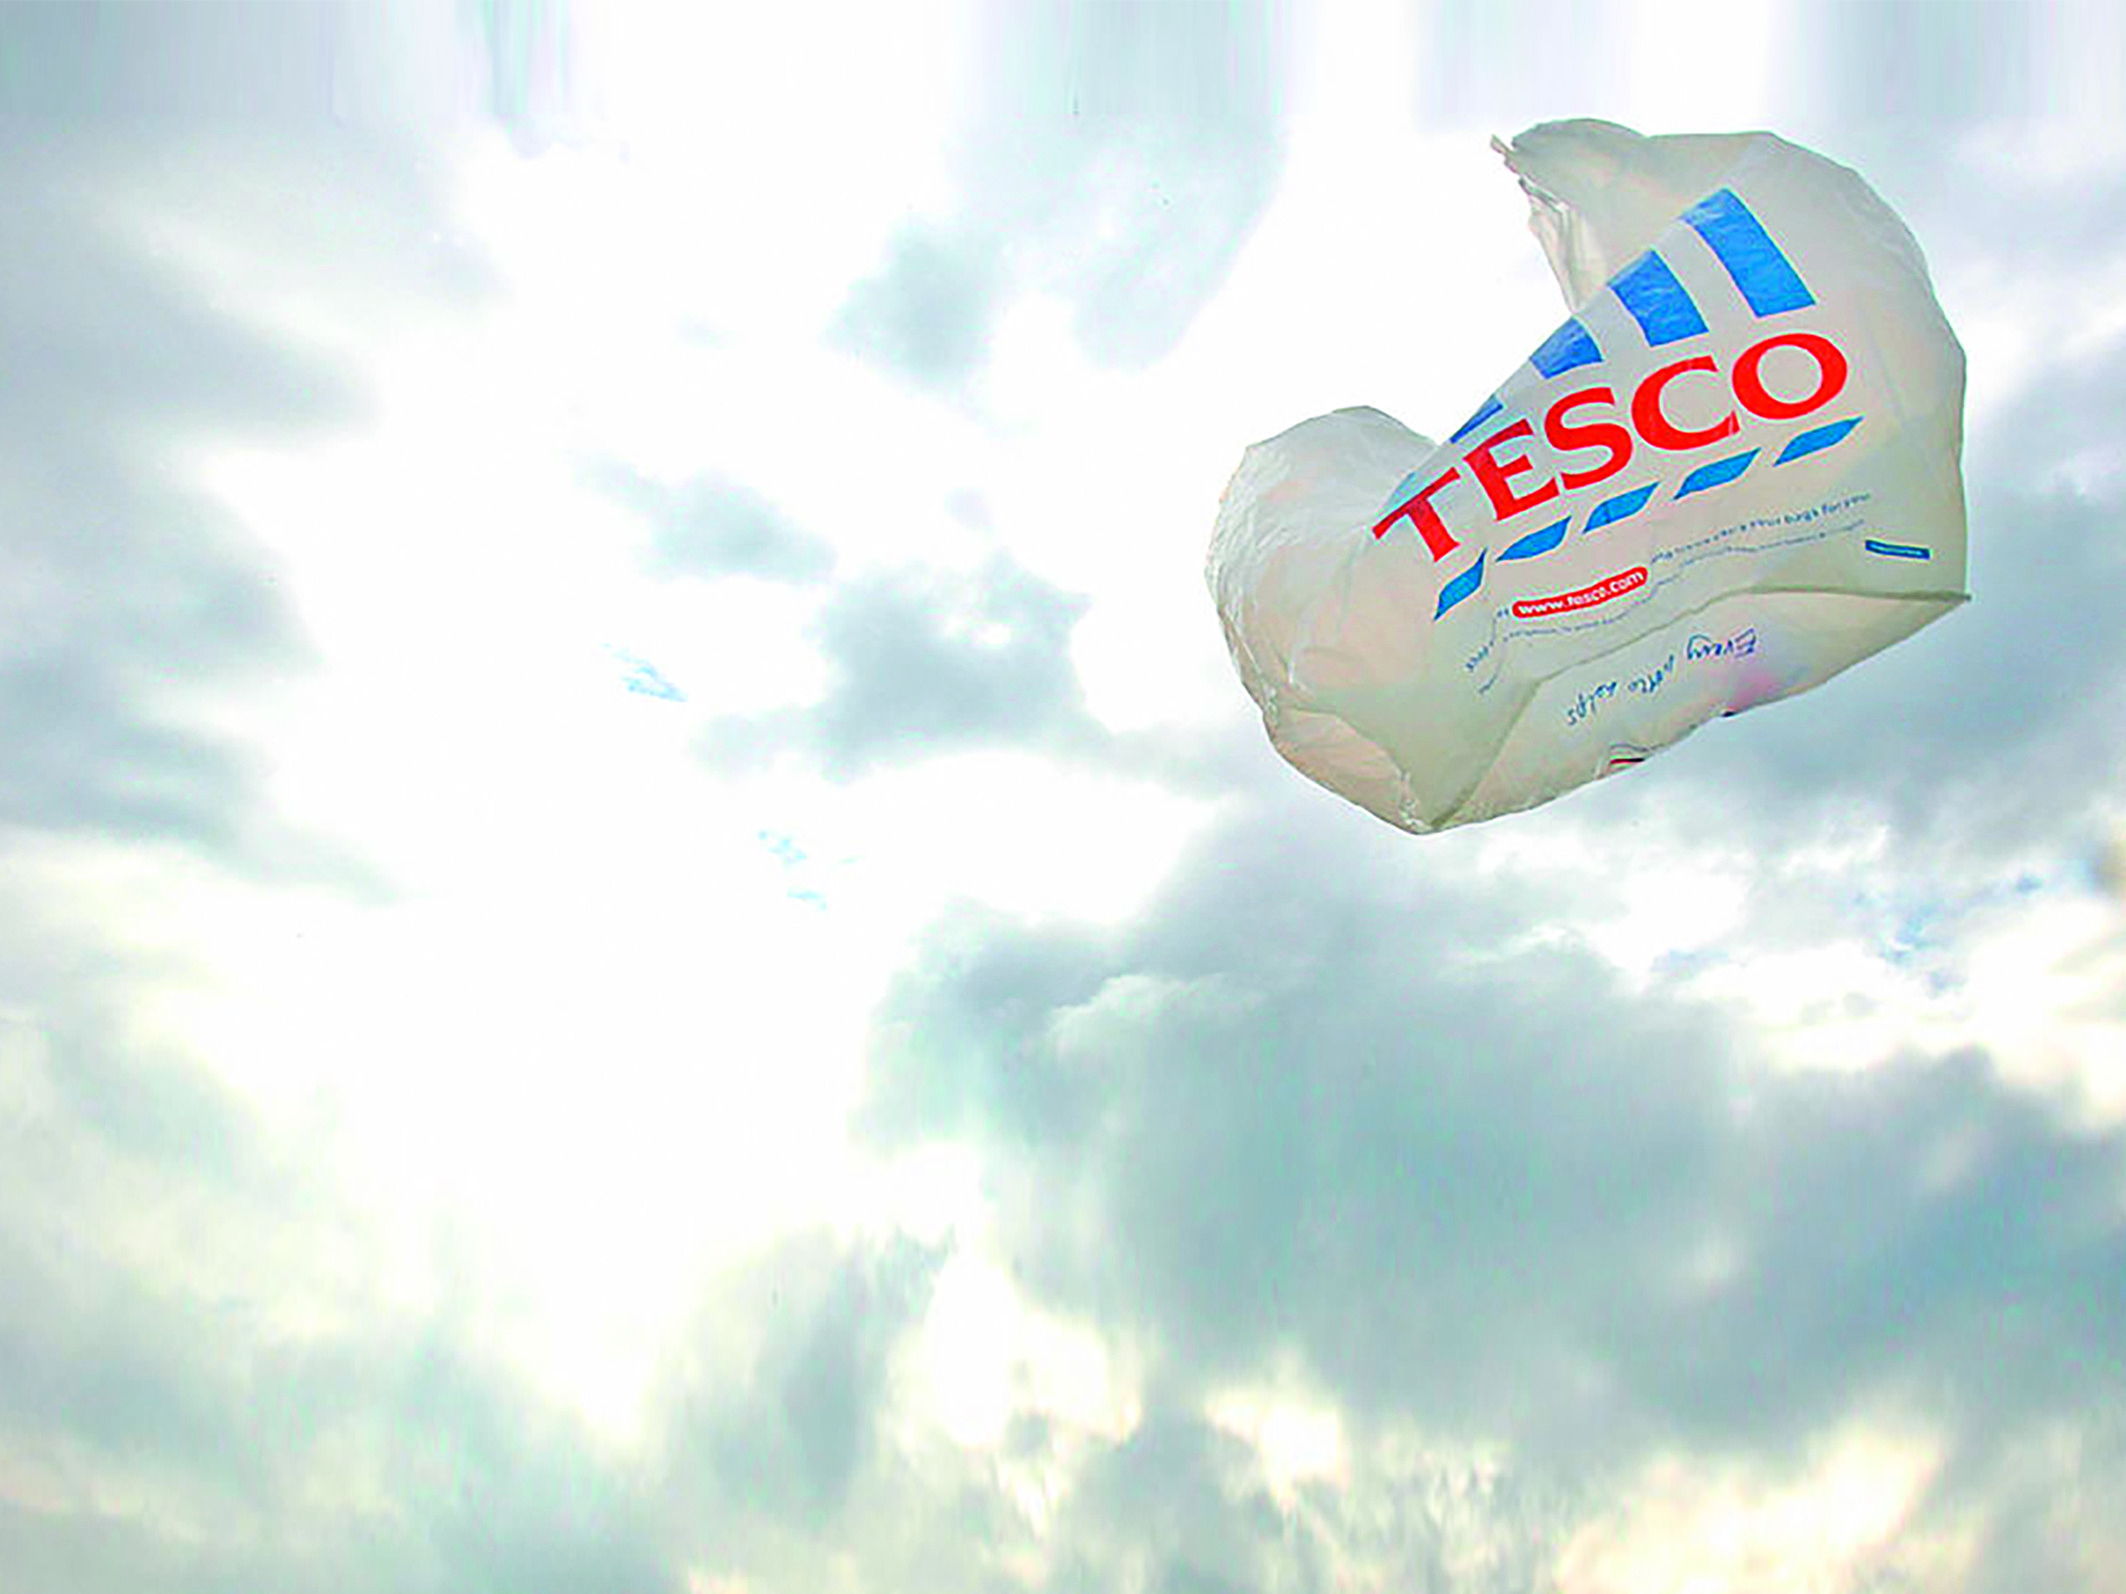 Tesco’s dramatic fall and how to avoid it